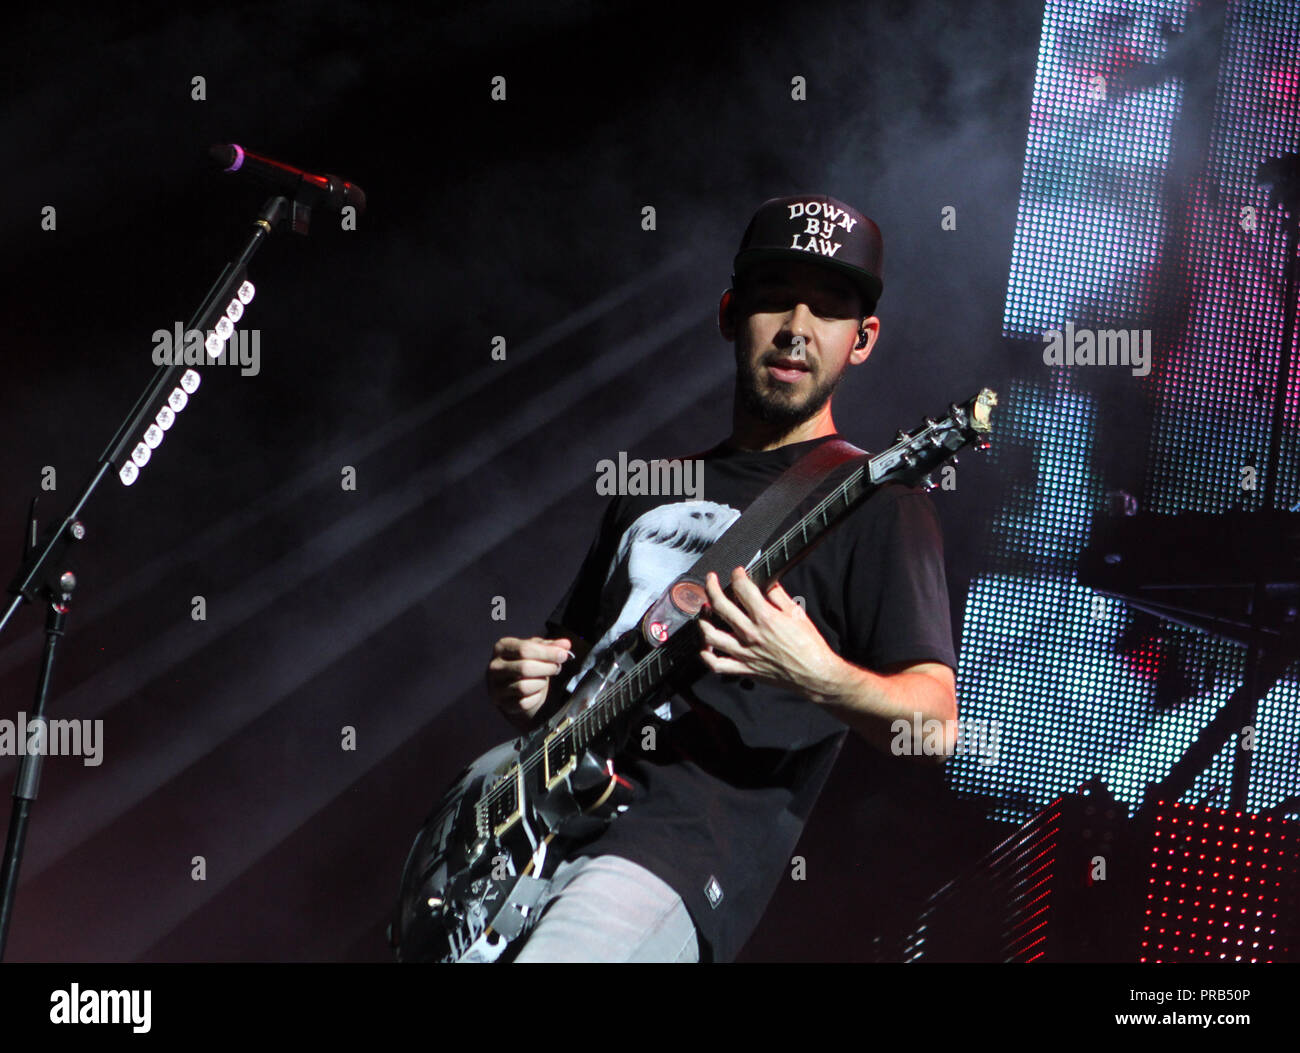 Mike Shinoda with Linkin Park performs on the opening night of their tour at the Cruzan Amphitheatre in West Palm Beach, Florida on August 8, 2014. Stock Photo